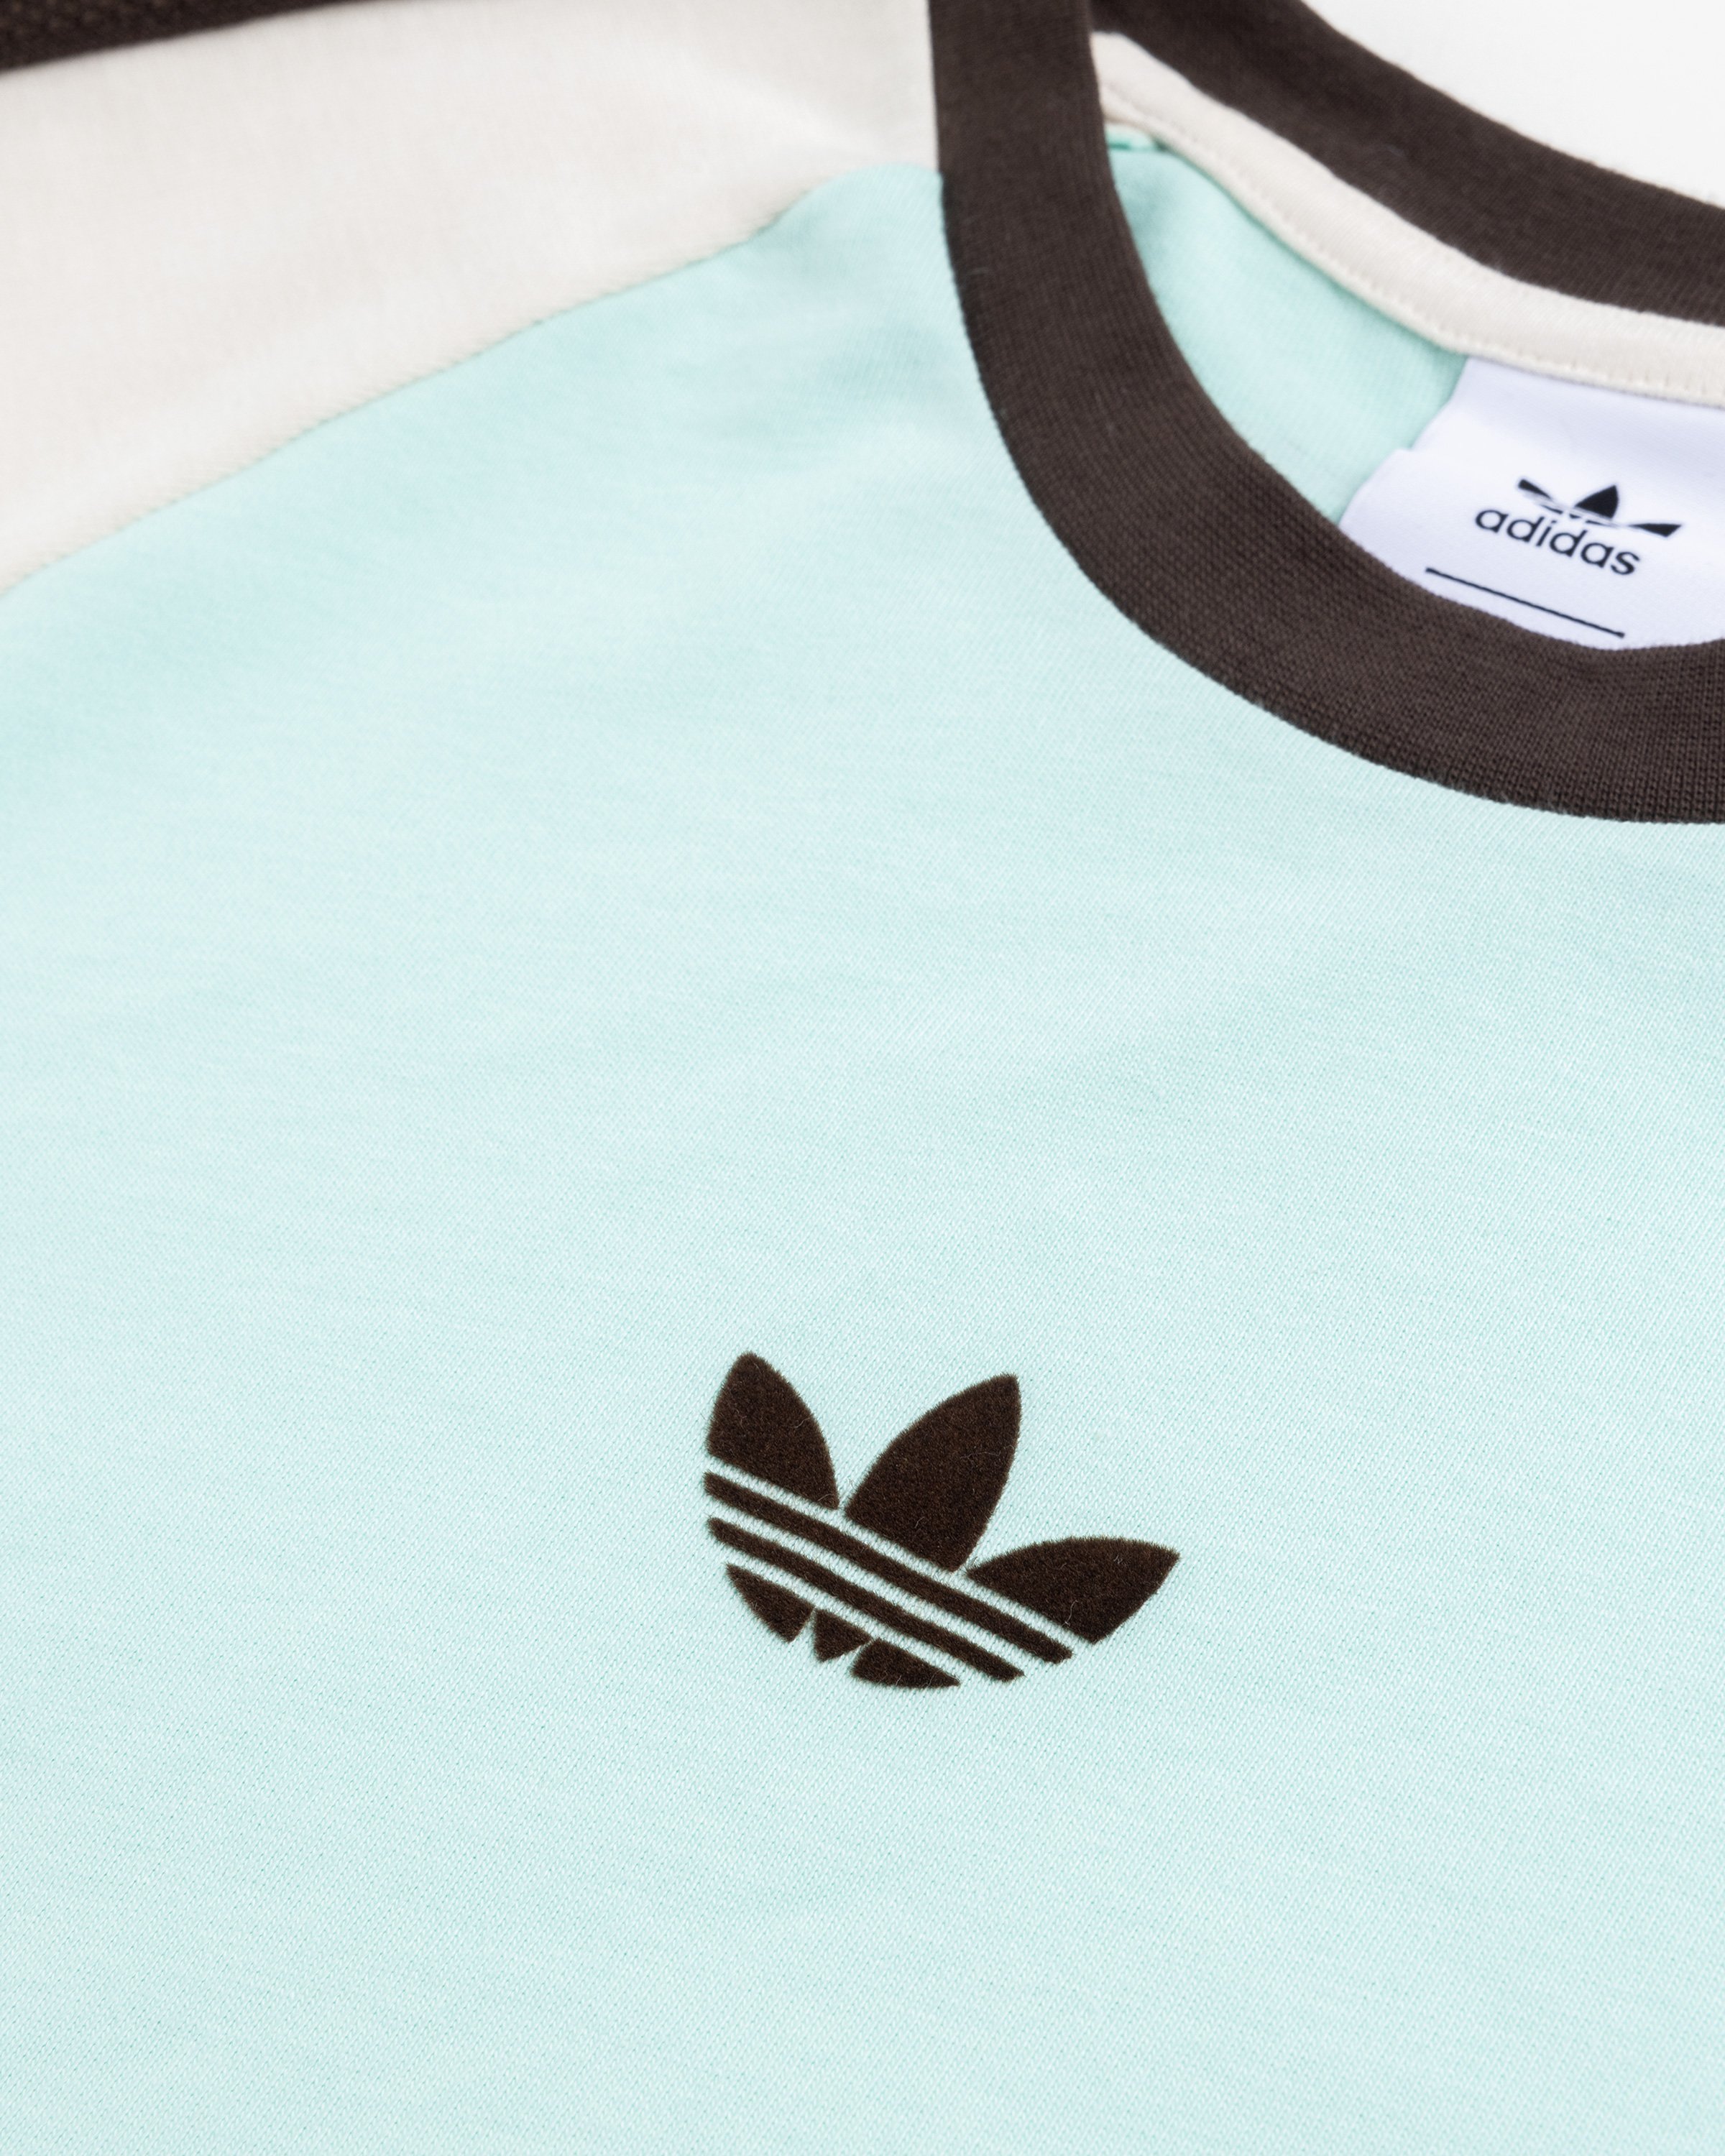 Adidas x Wales Bonner - Organic Cotton Tee Clear Mint - Clothing - Green - Image 6